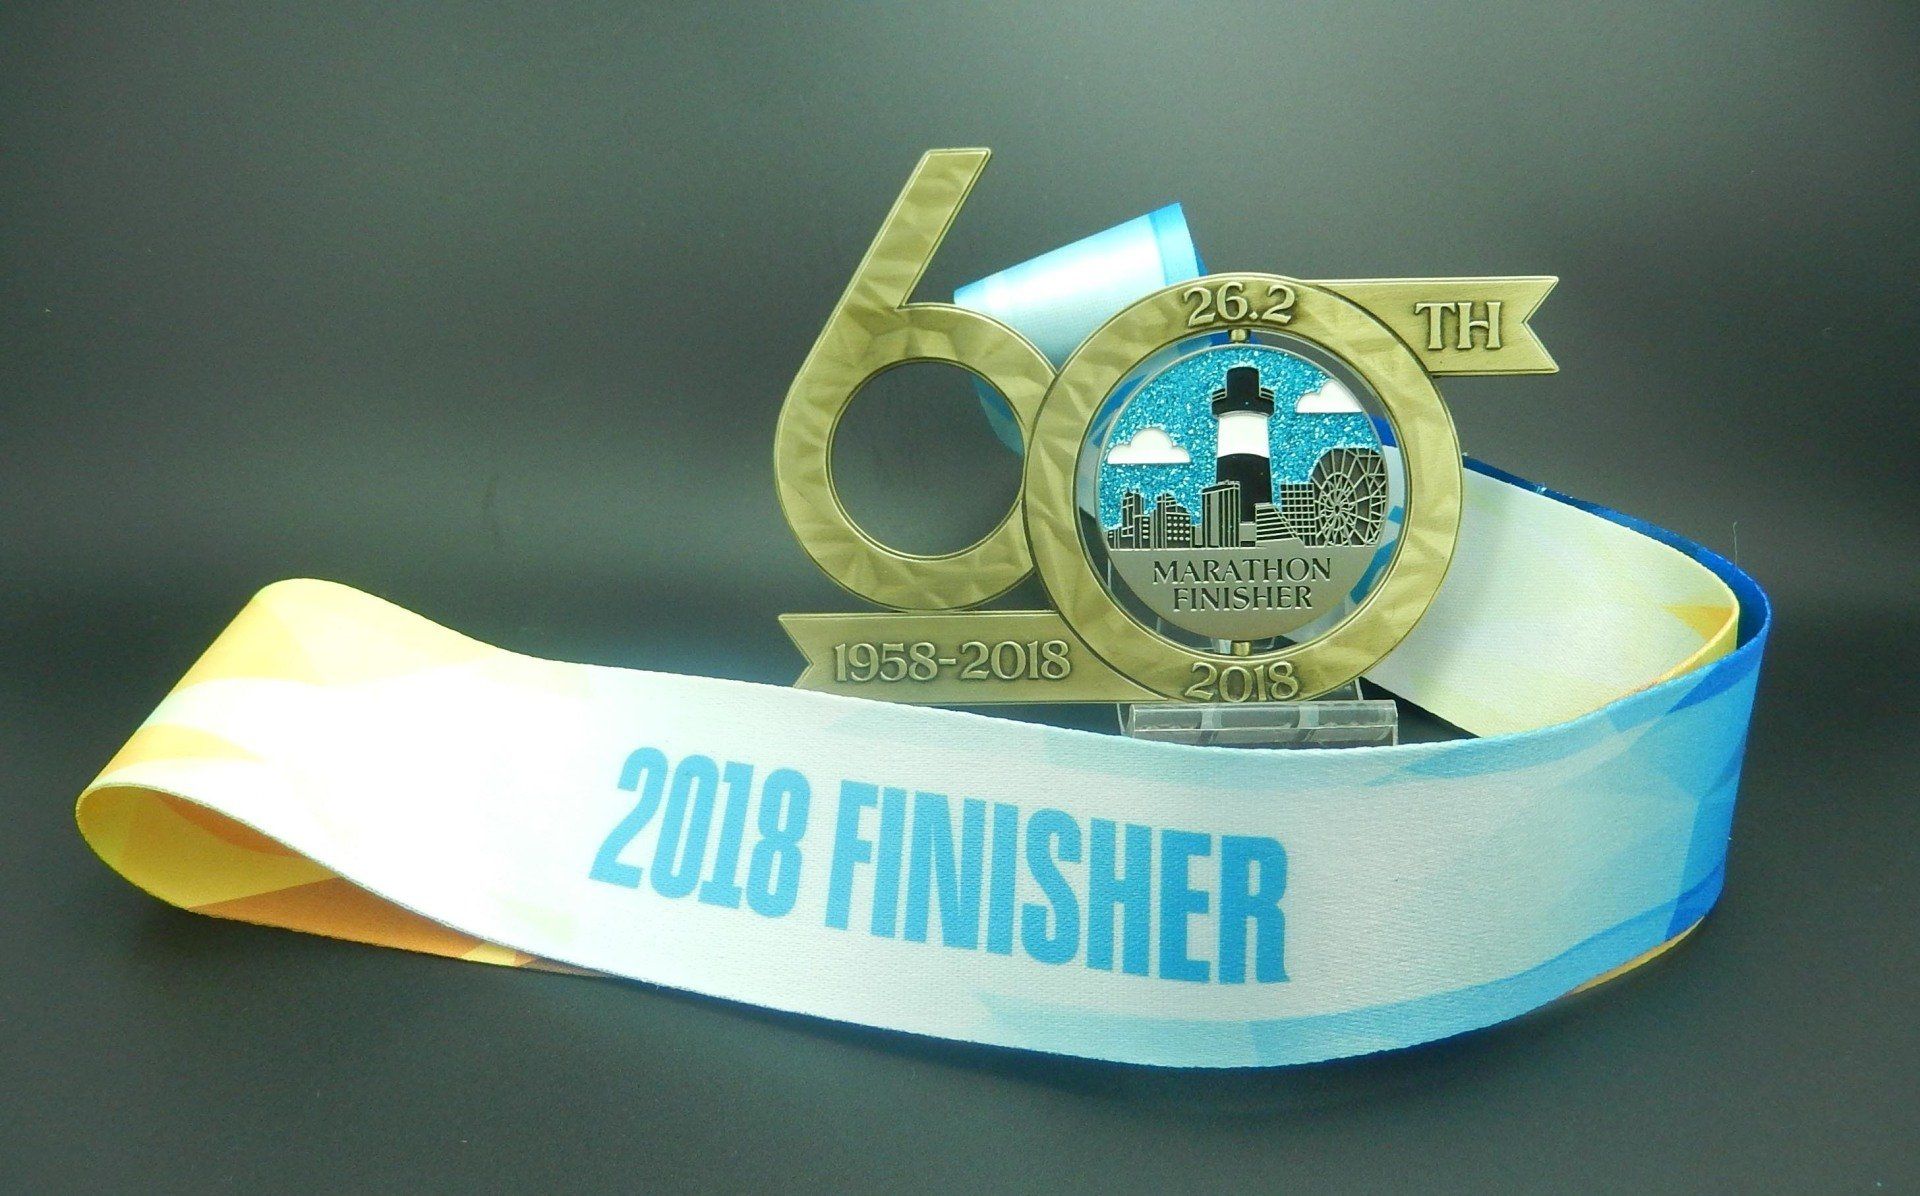 A medal that says 2018 finisher on it